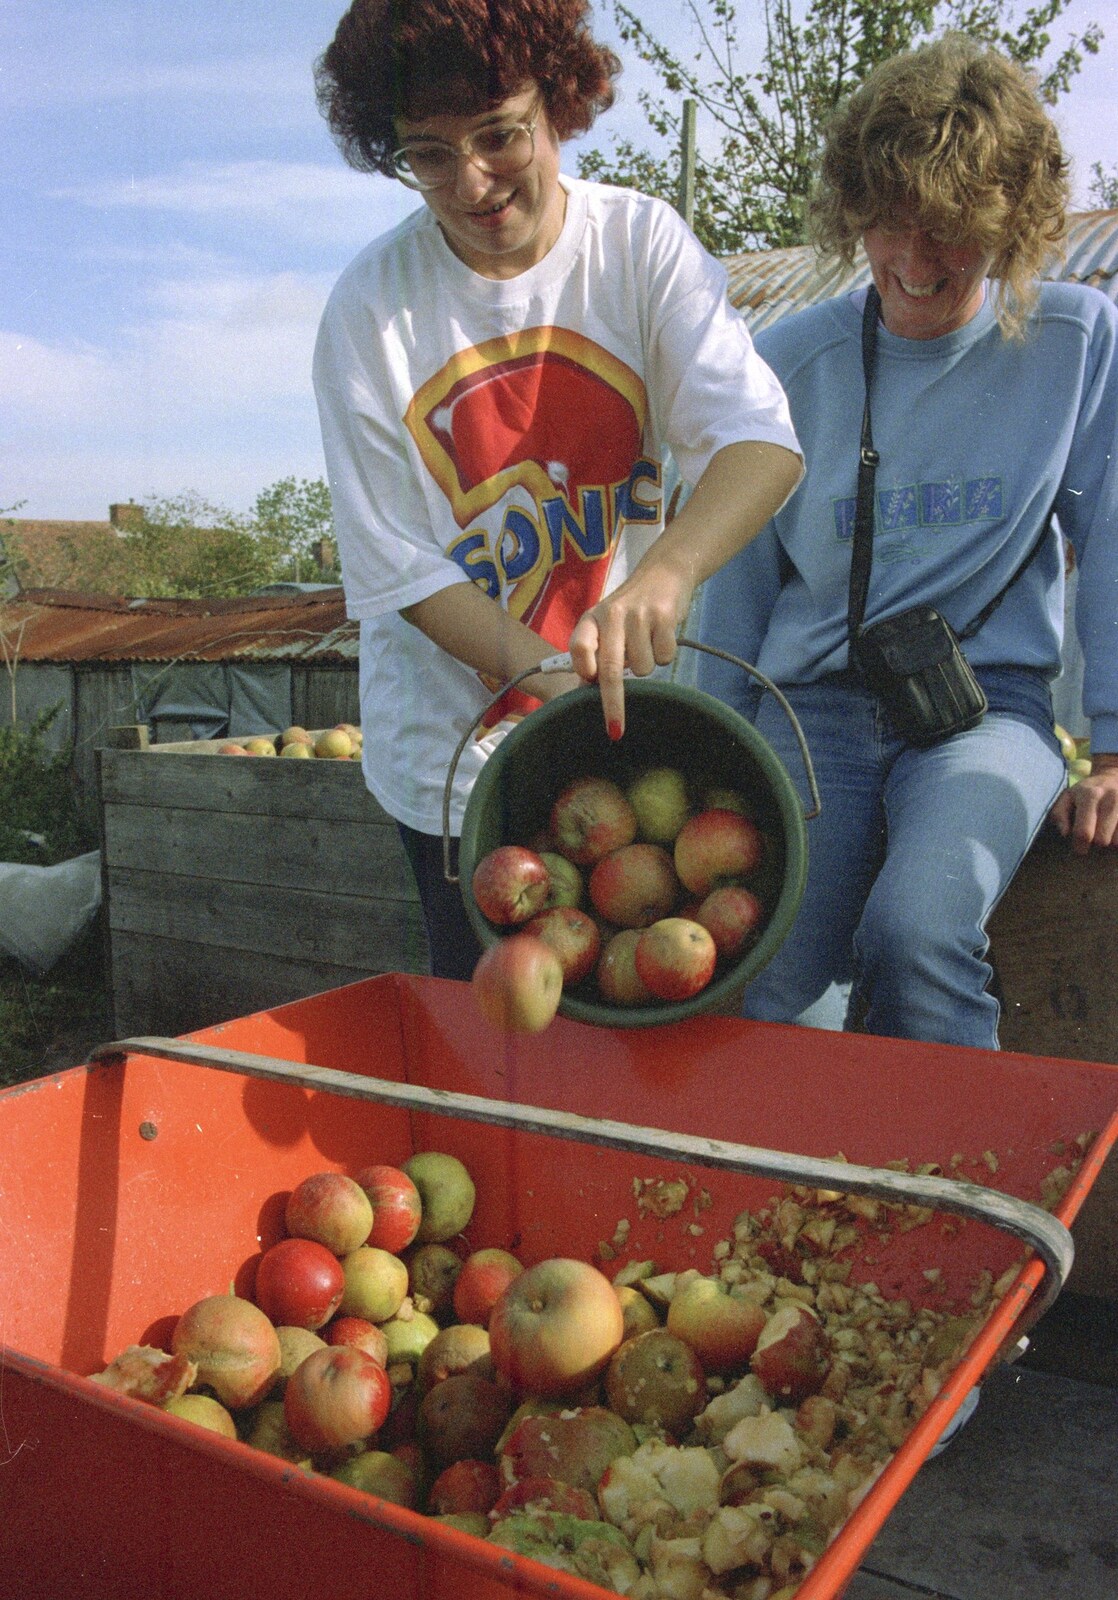 Tipping apples from Cider Making With Geoff and Brenda, Stuston, Suffolk - 10th September 1998